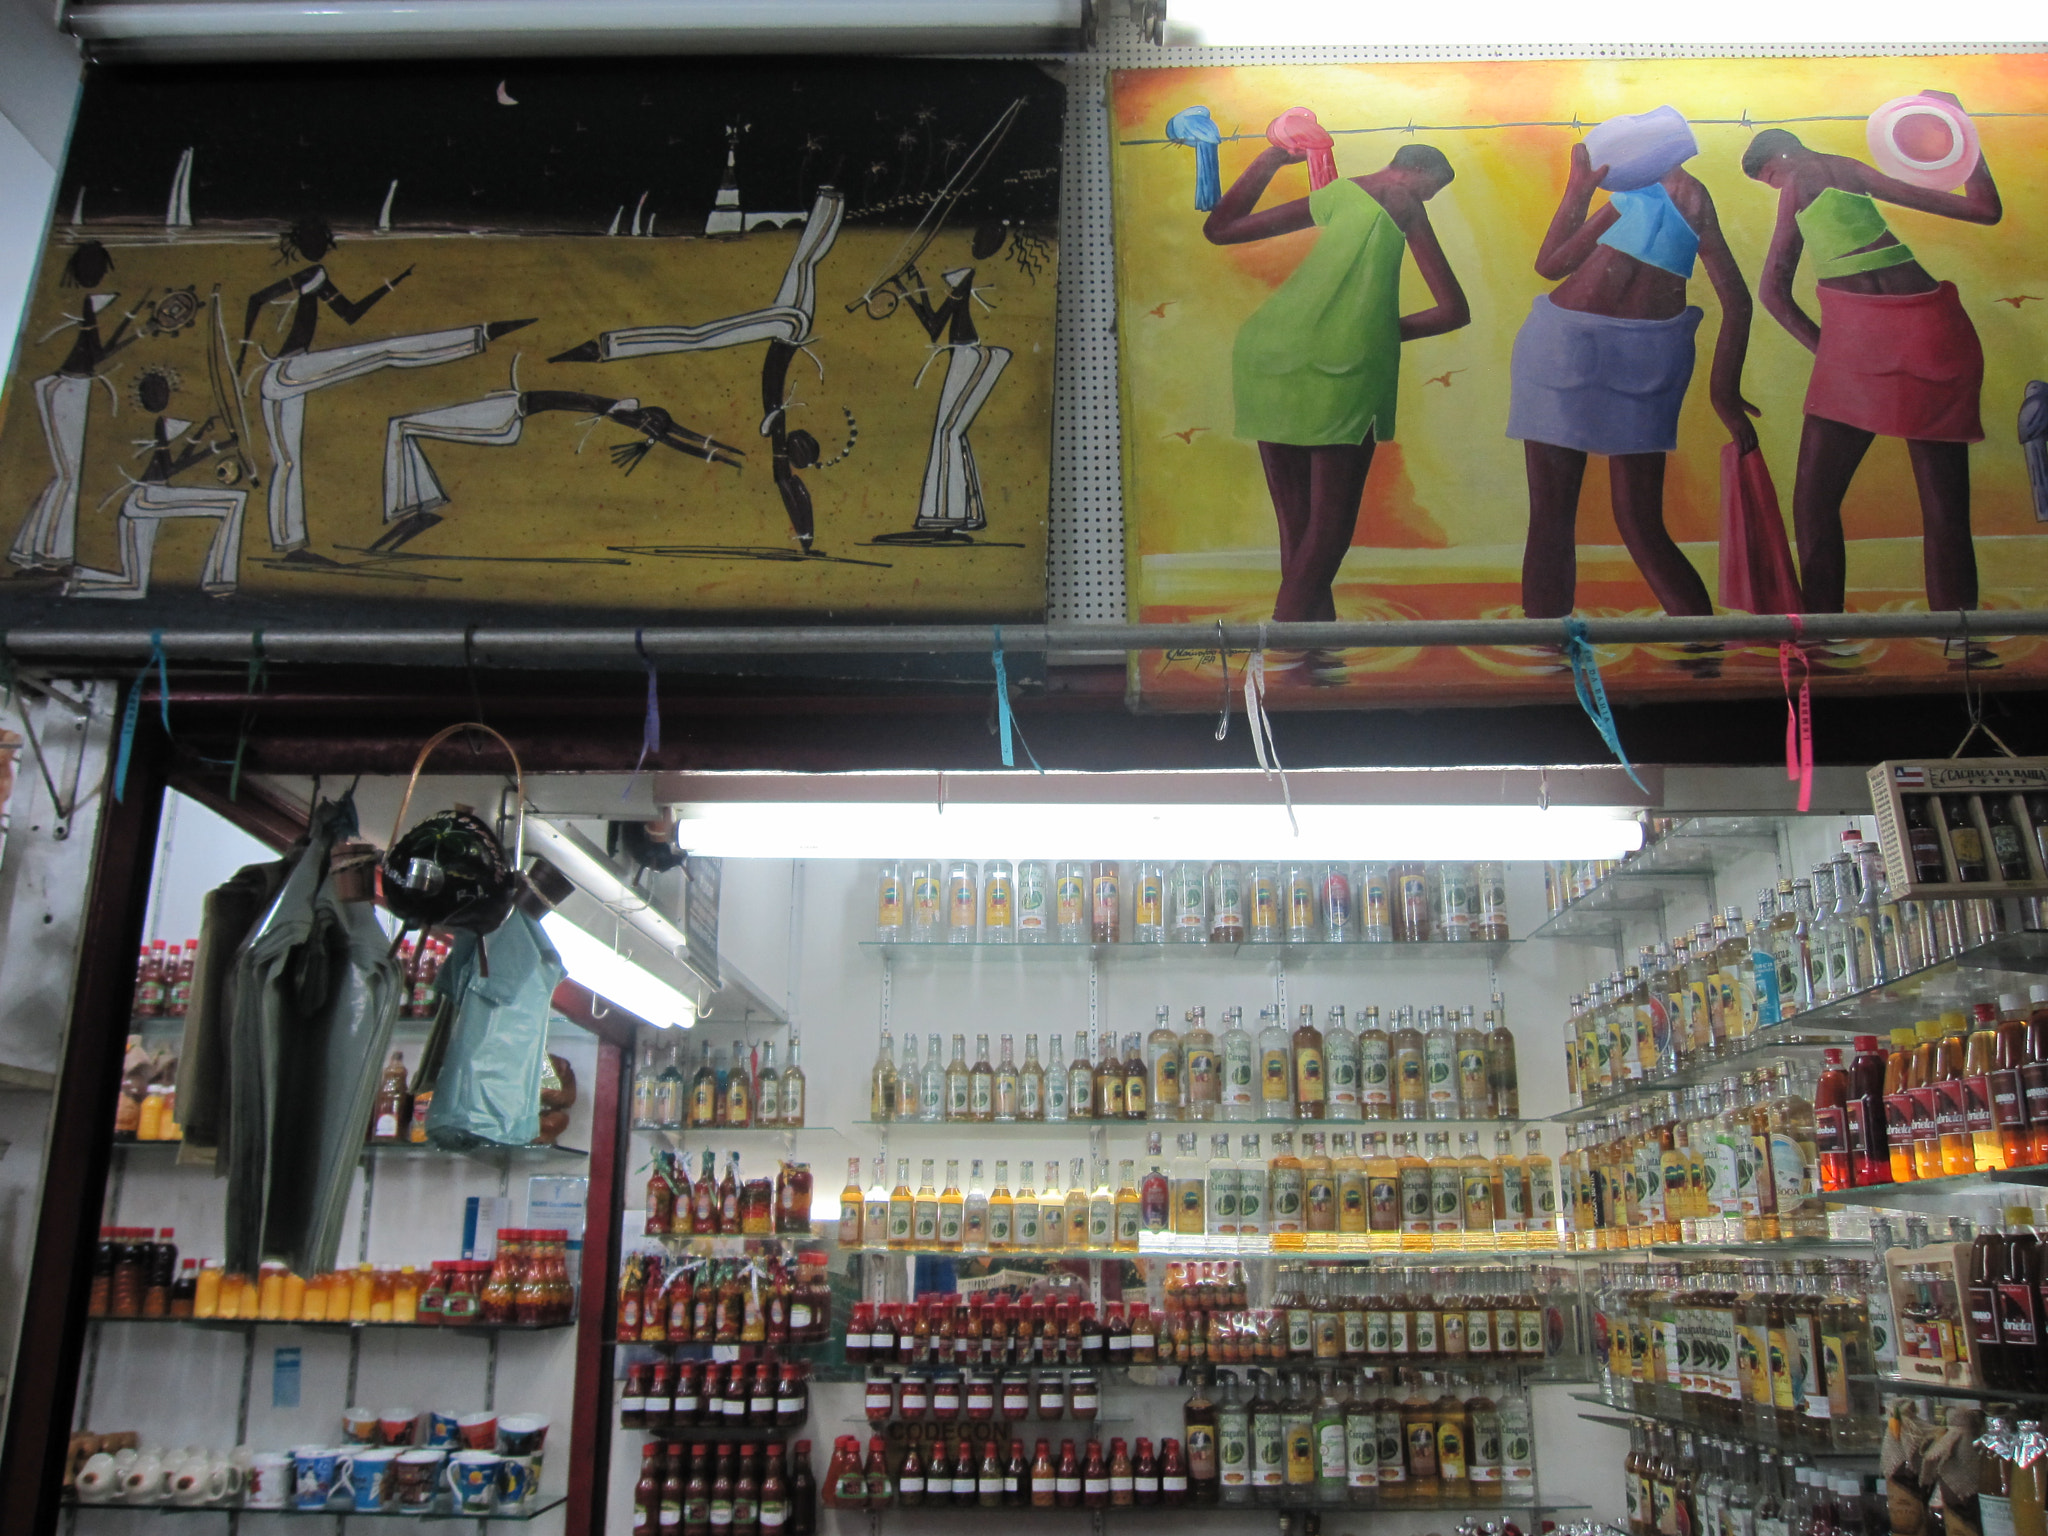 Canon PowerShot SD960 IS (Digital IXUS 110 IS / IXY Digital 510 IS) sample photo. Typical spices store photography